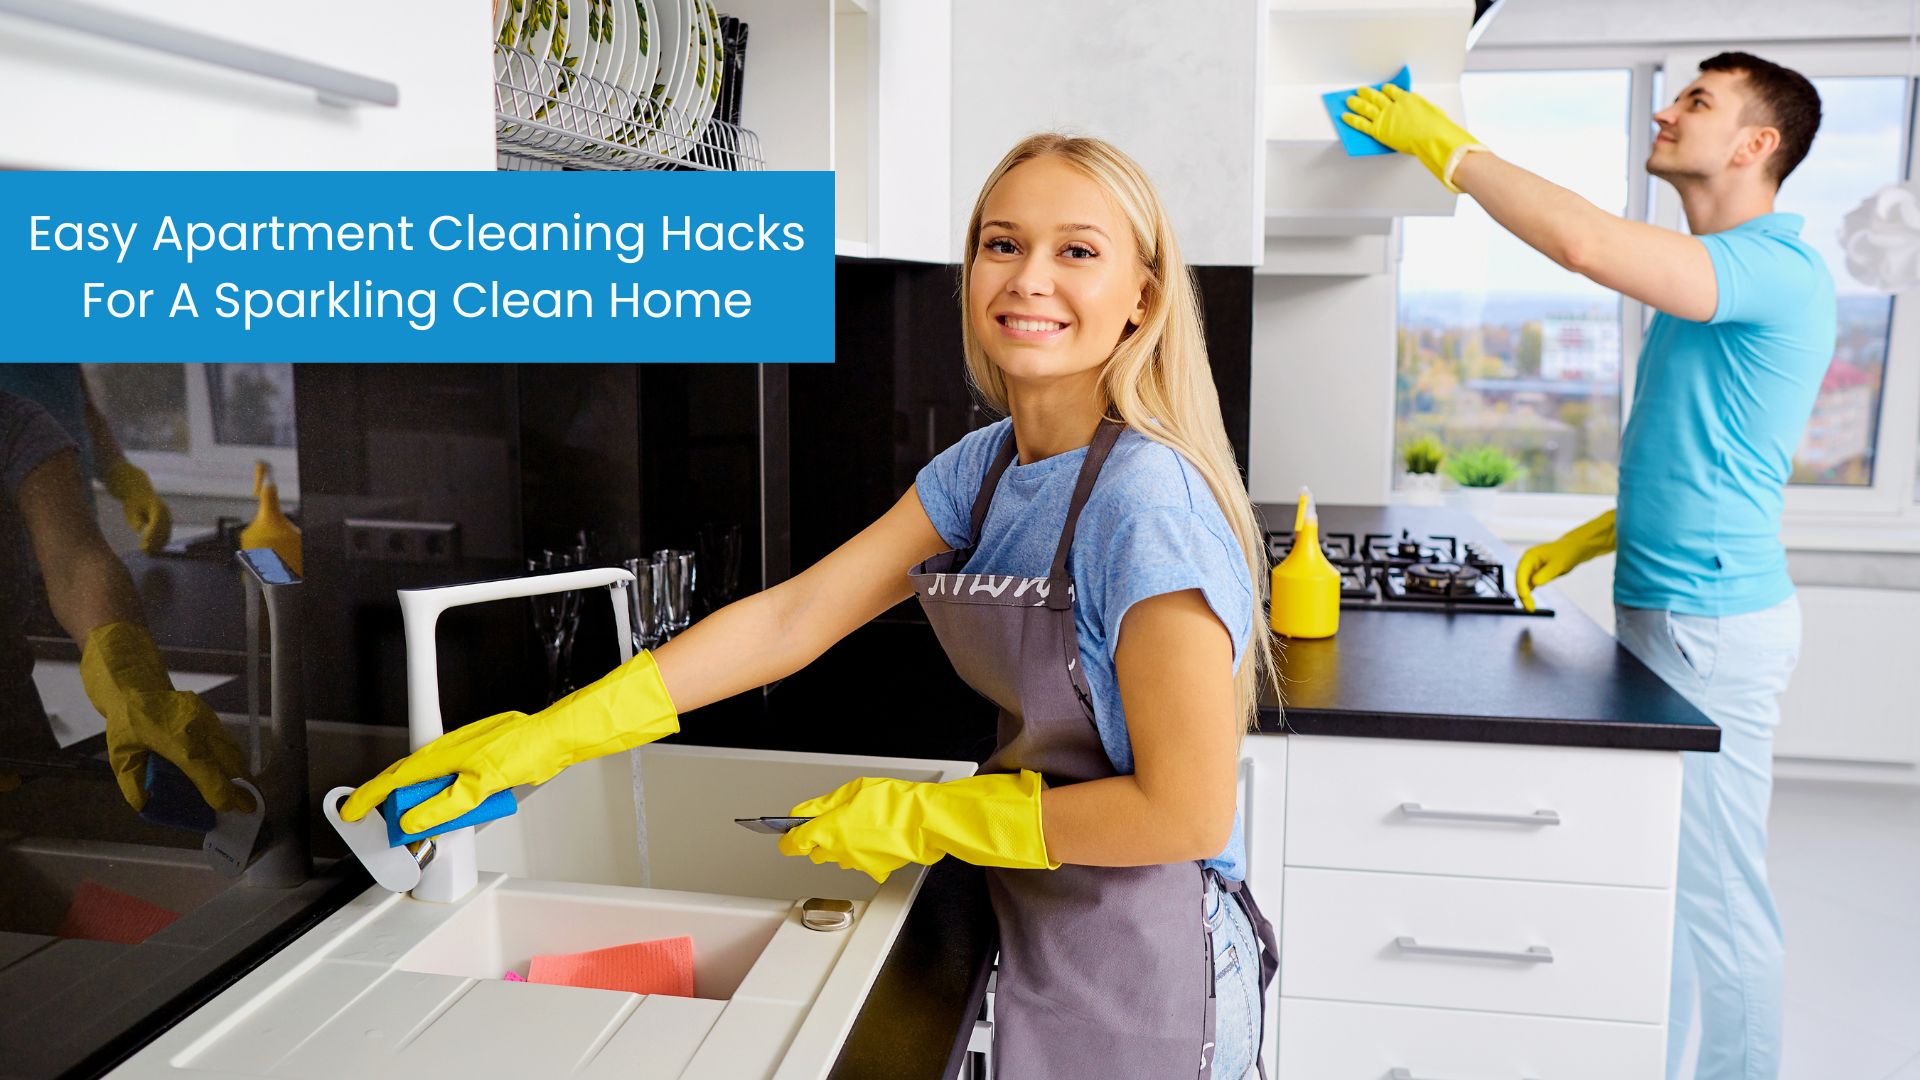 8 Easy Apartment Cleaning Hacks For A Sparkling Clean Home